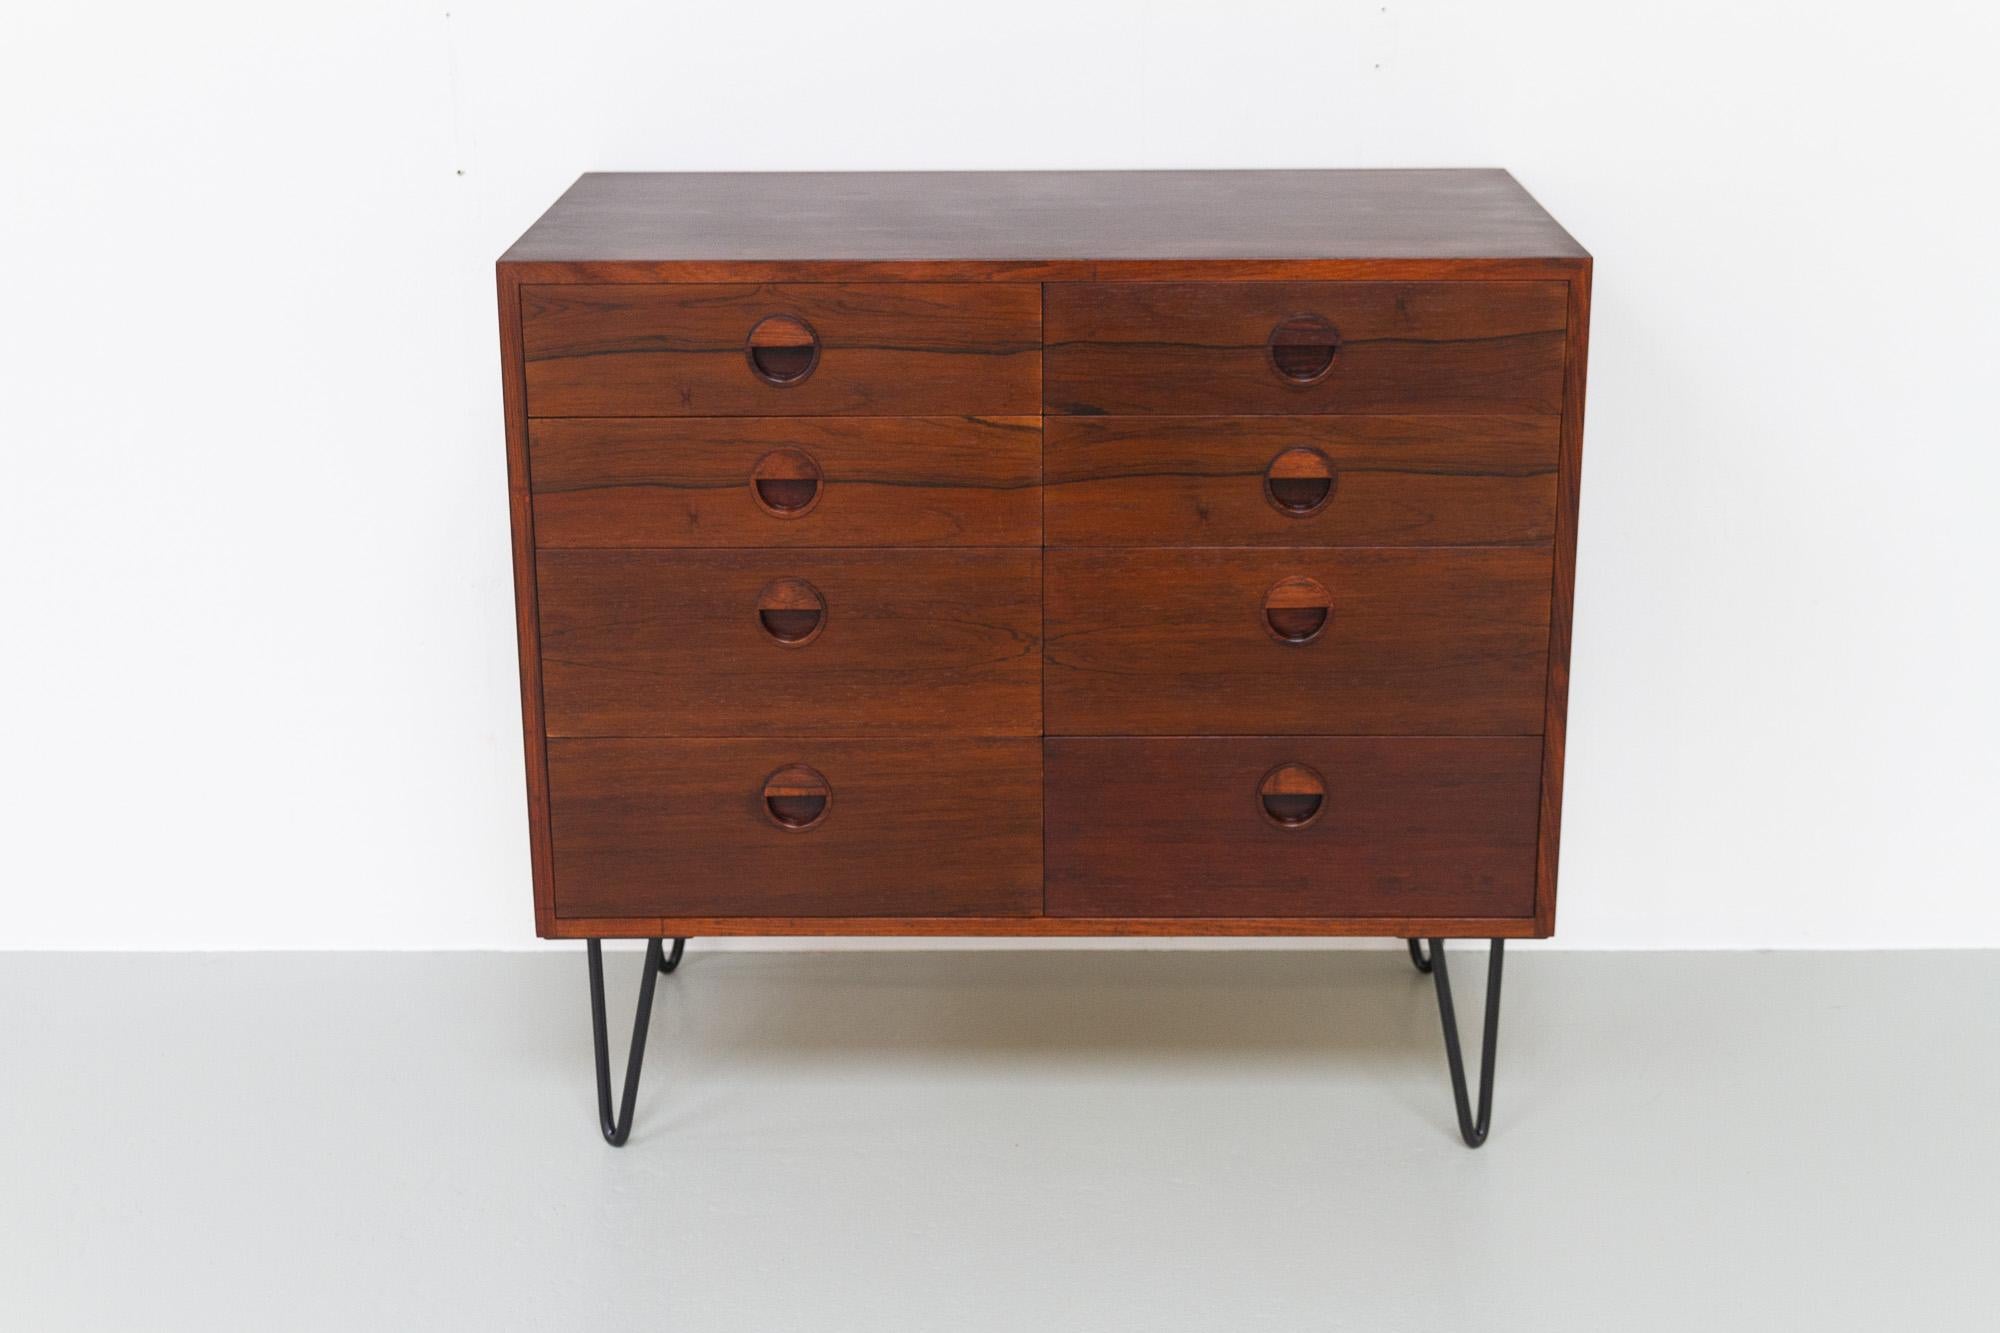 Vintage Danish Rosewood Chest of Drawers by Hg Furniture, 1960s For Sale 7